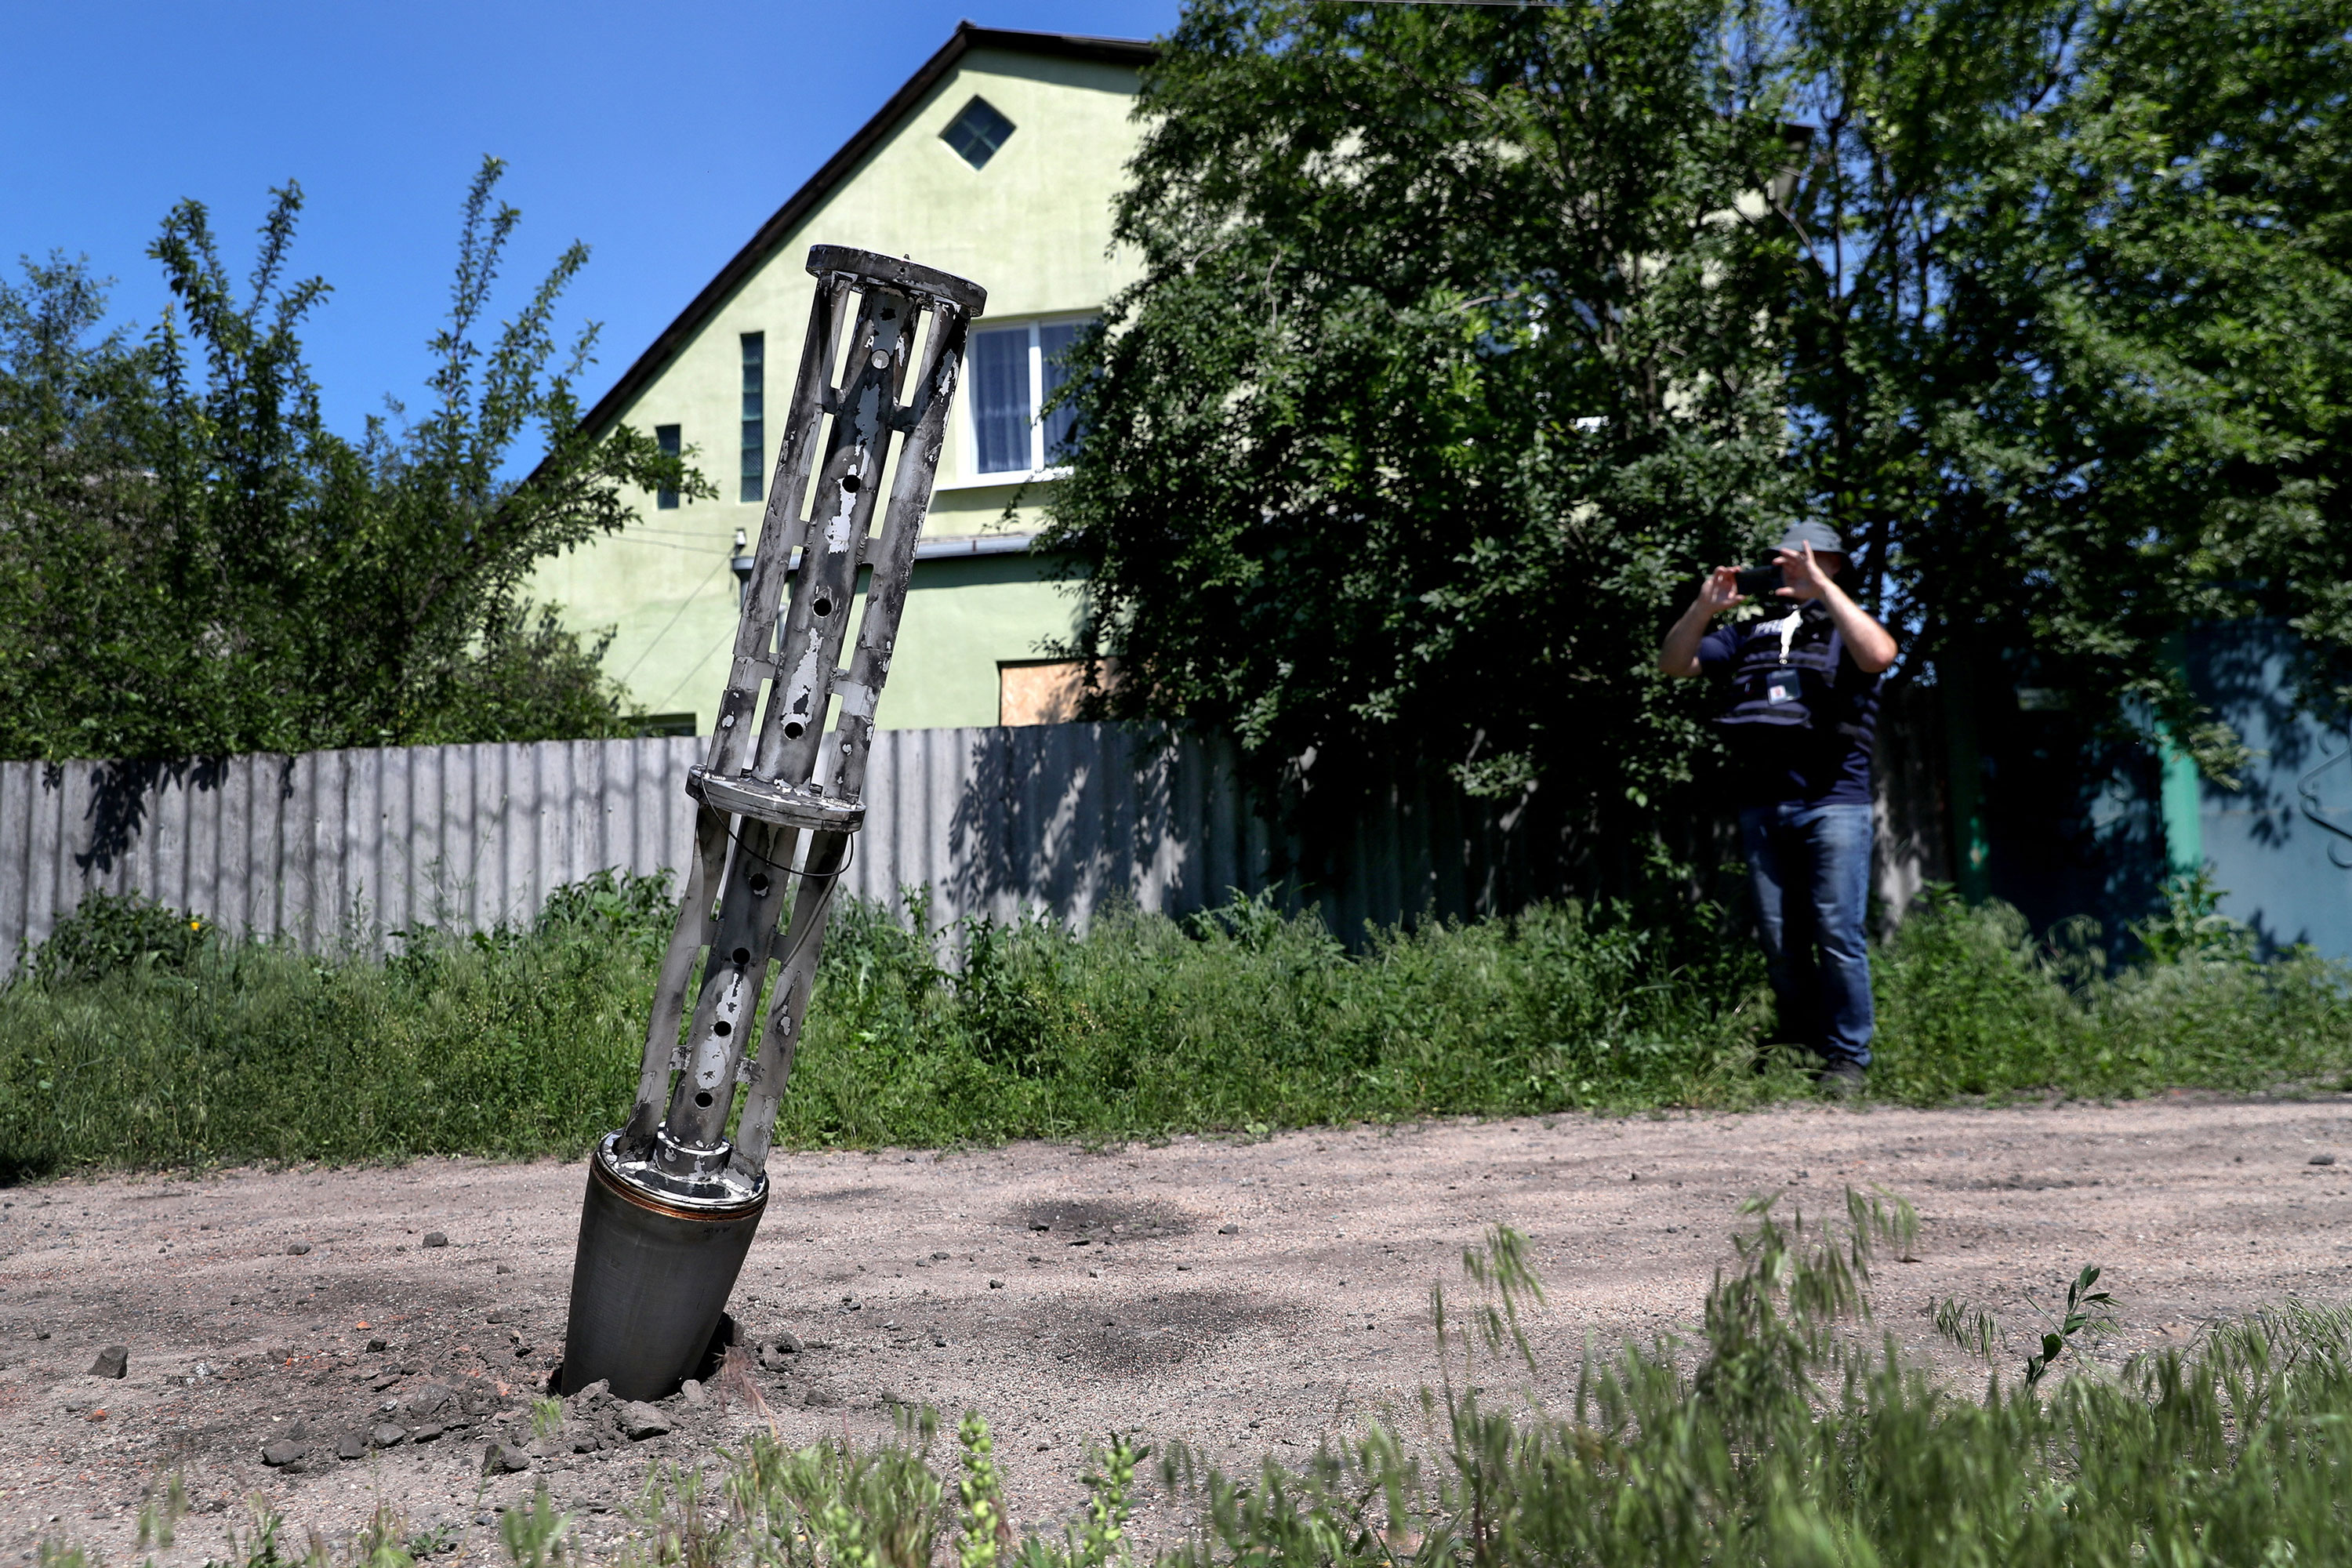 An emptied cluster munition container is seen stuck in the ground following a military strike on the outskirts of Kharkiv, Ukraine, on June 10, 2022.